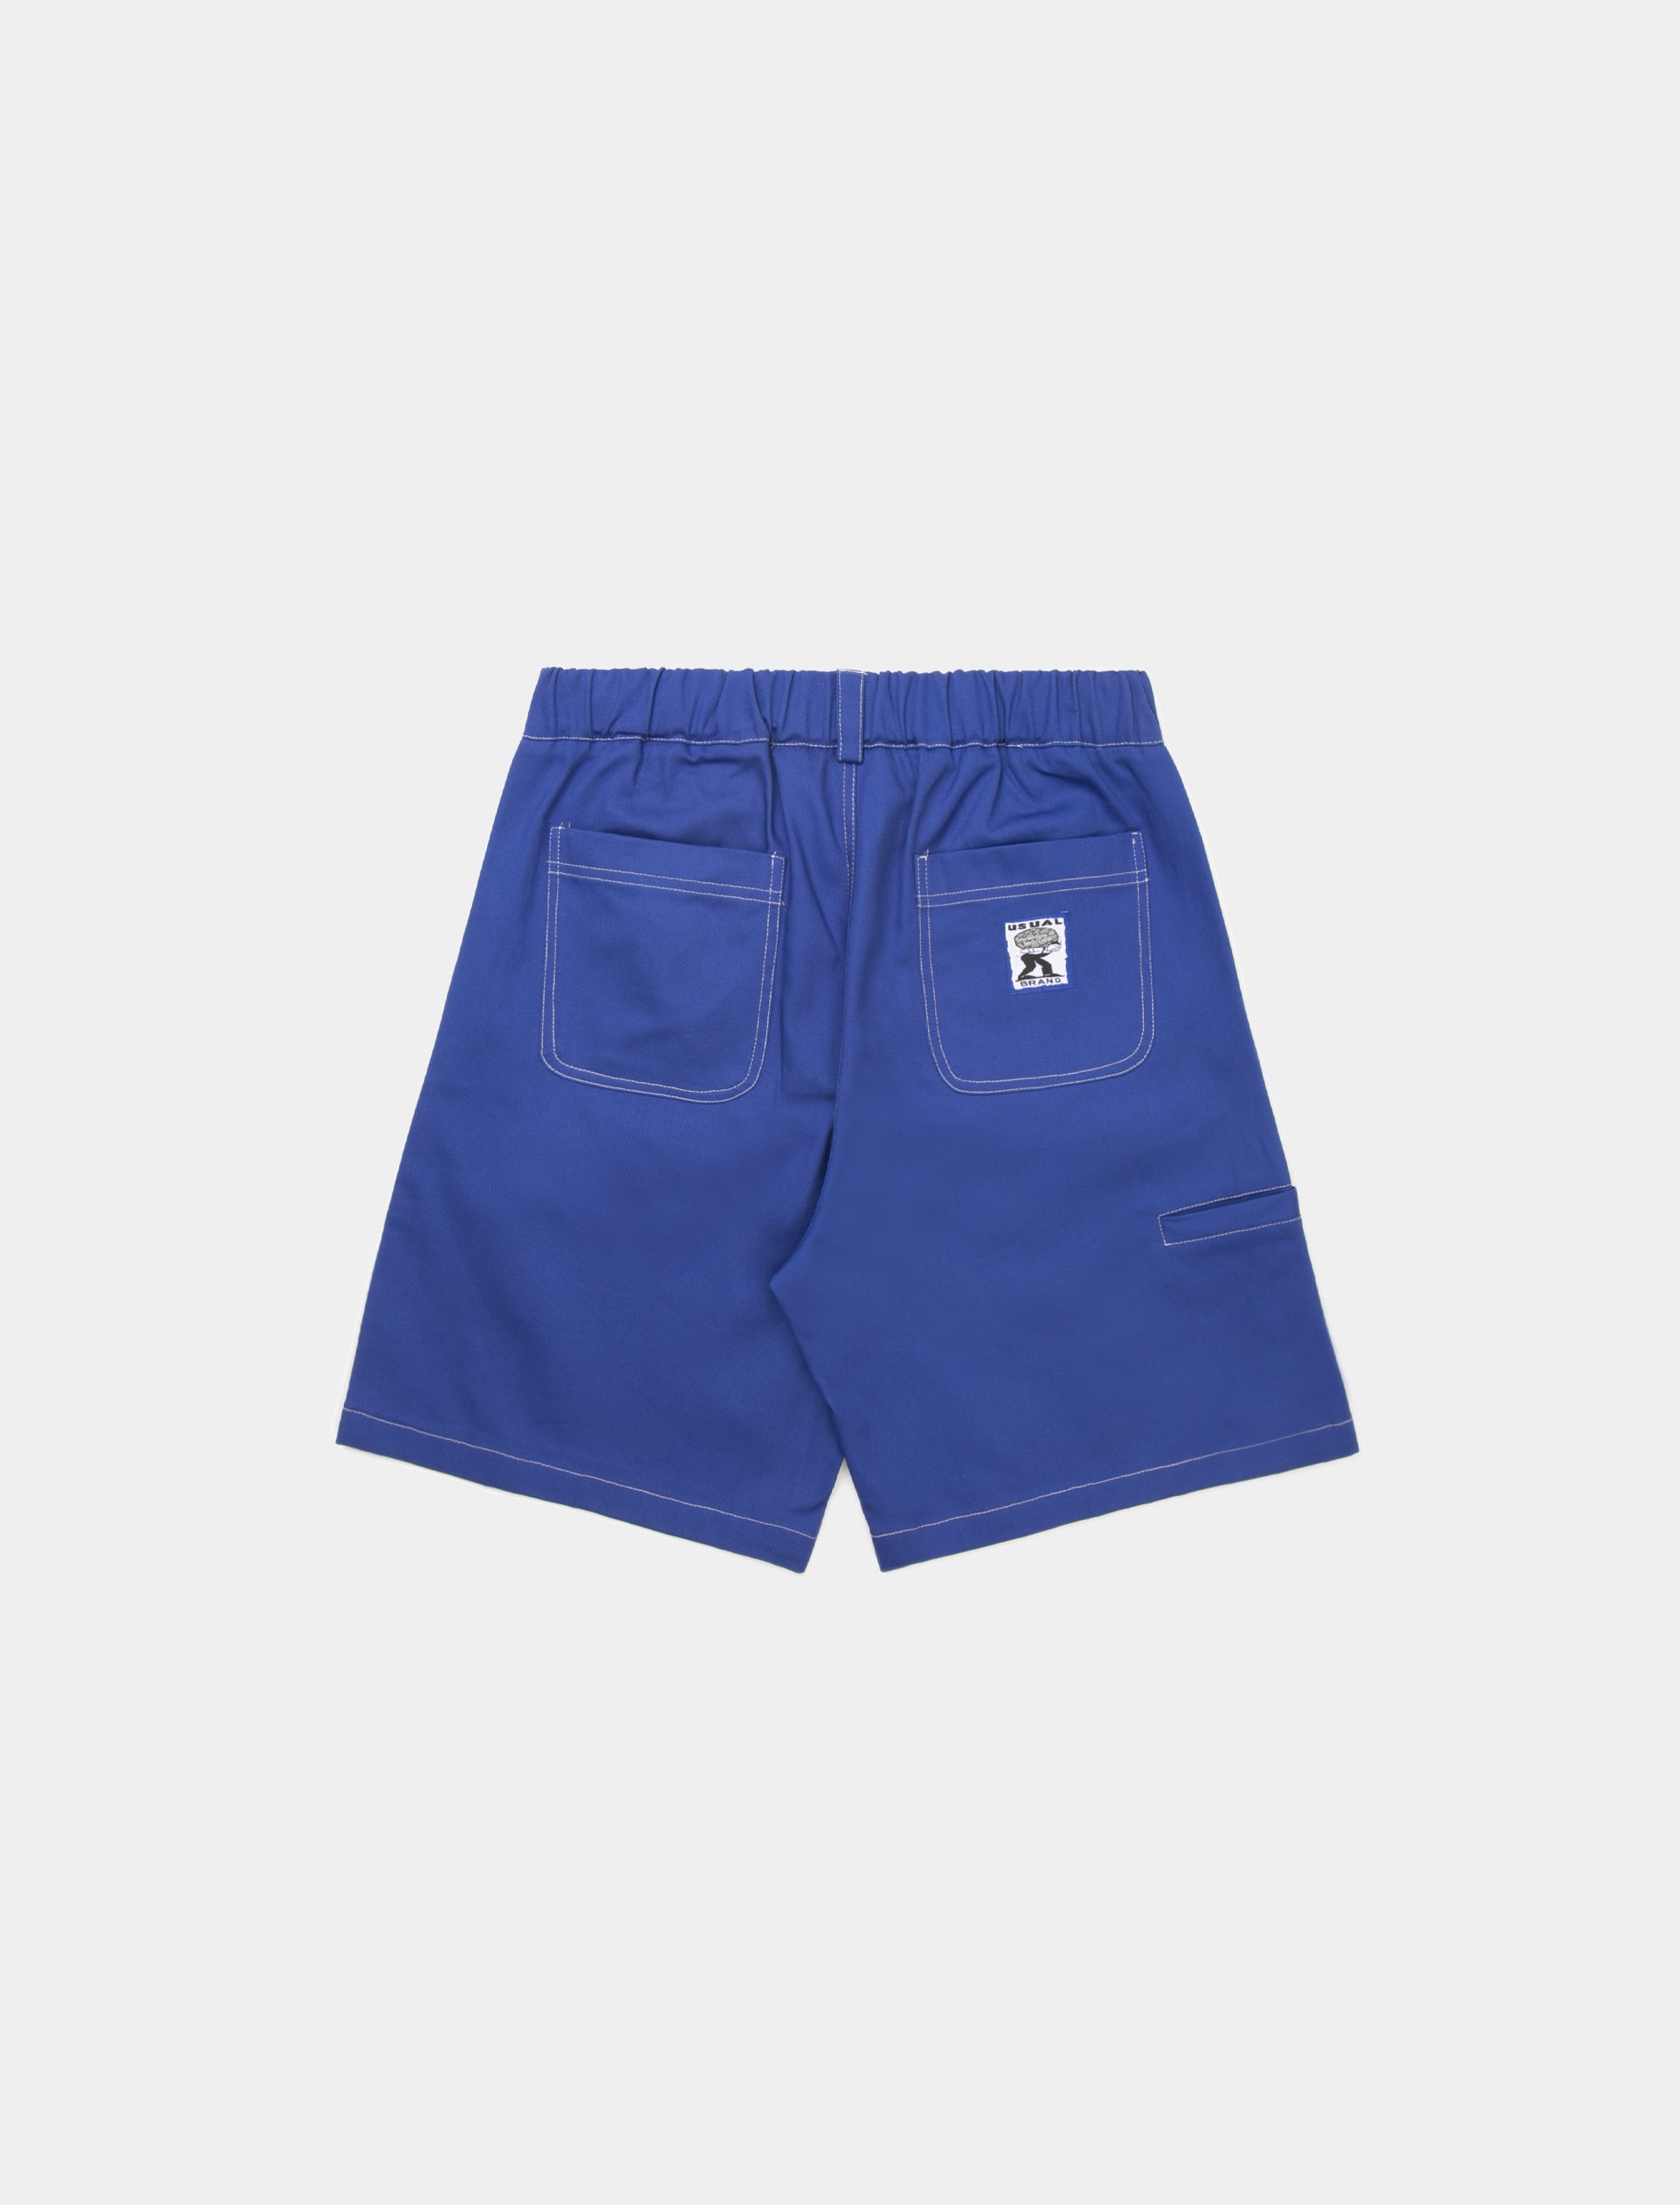 Baggy Fit Short Pants. Low rise. 100% Cotton. Elastic waist on back. Botton and zip. Made in Italy.